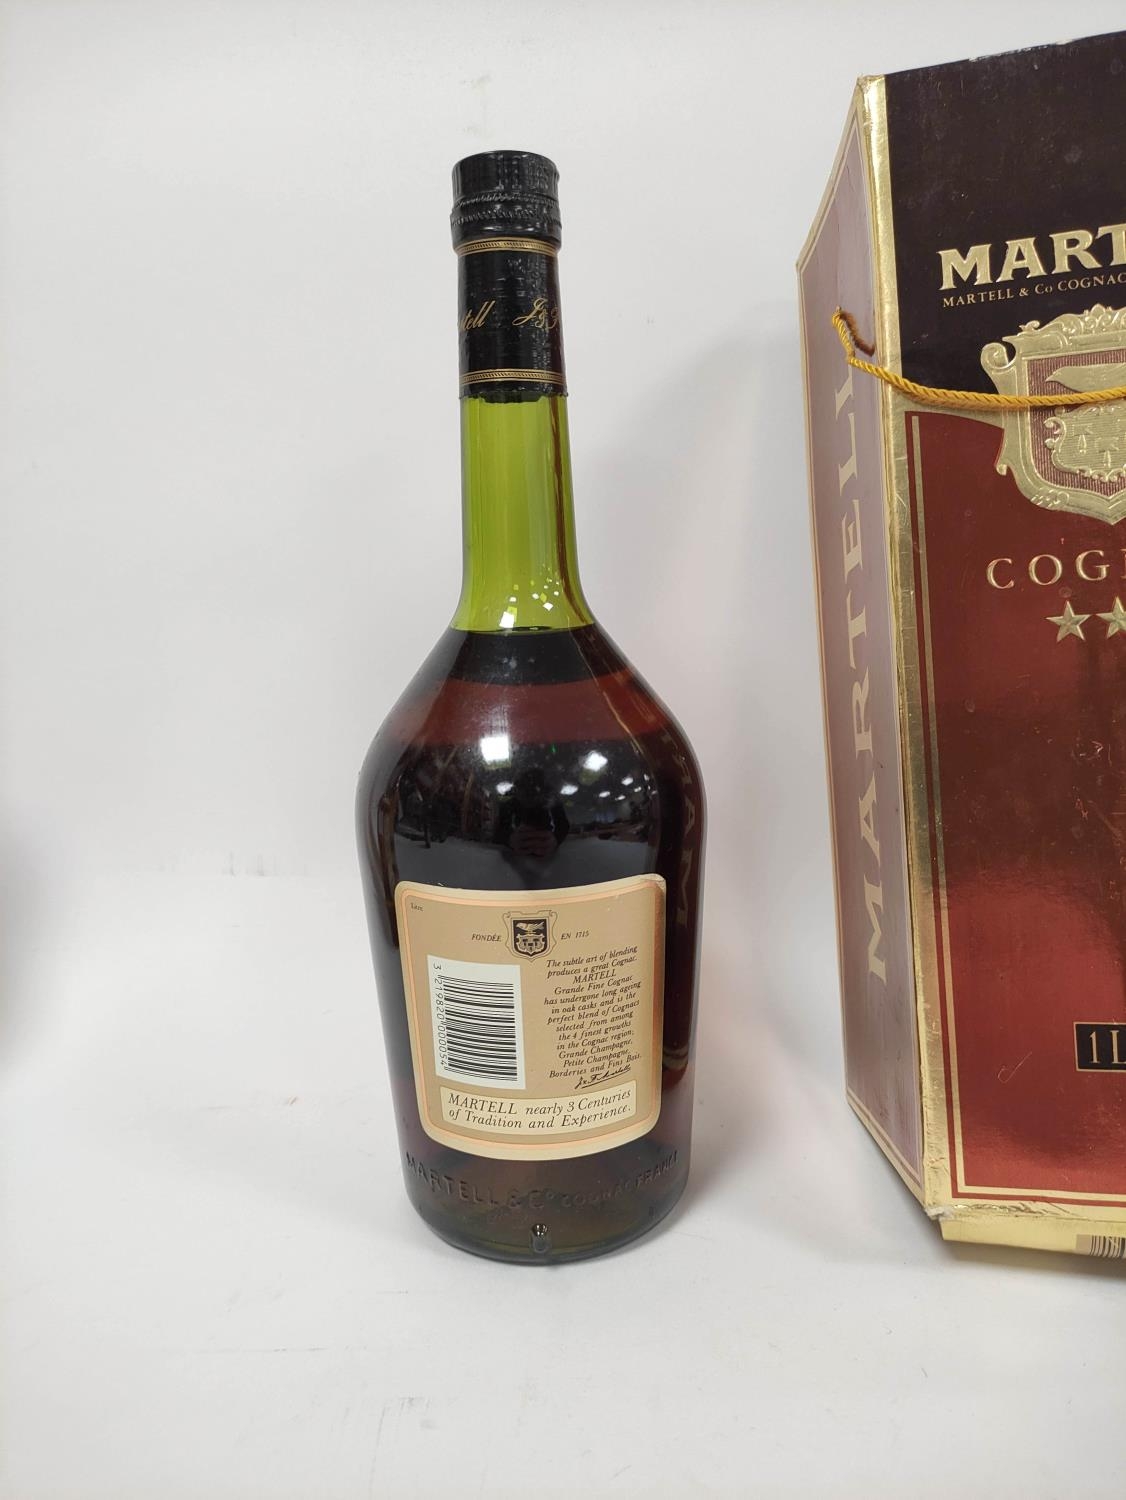 Martell cognac, Bottled circa 1970s, 70 proof, 35 fl oz, 40% vol, with box - Image 4 of 5